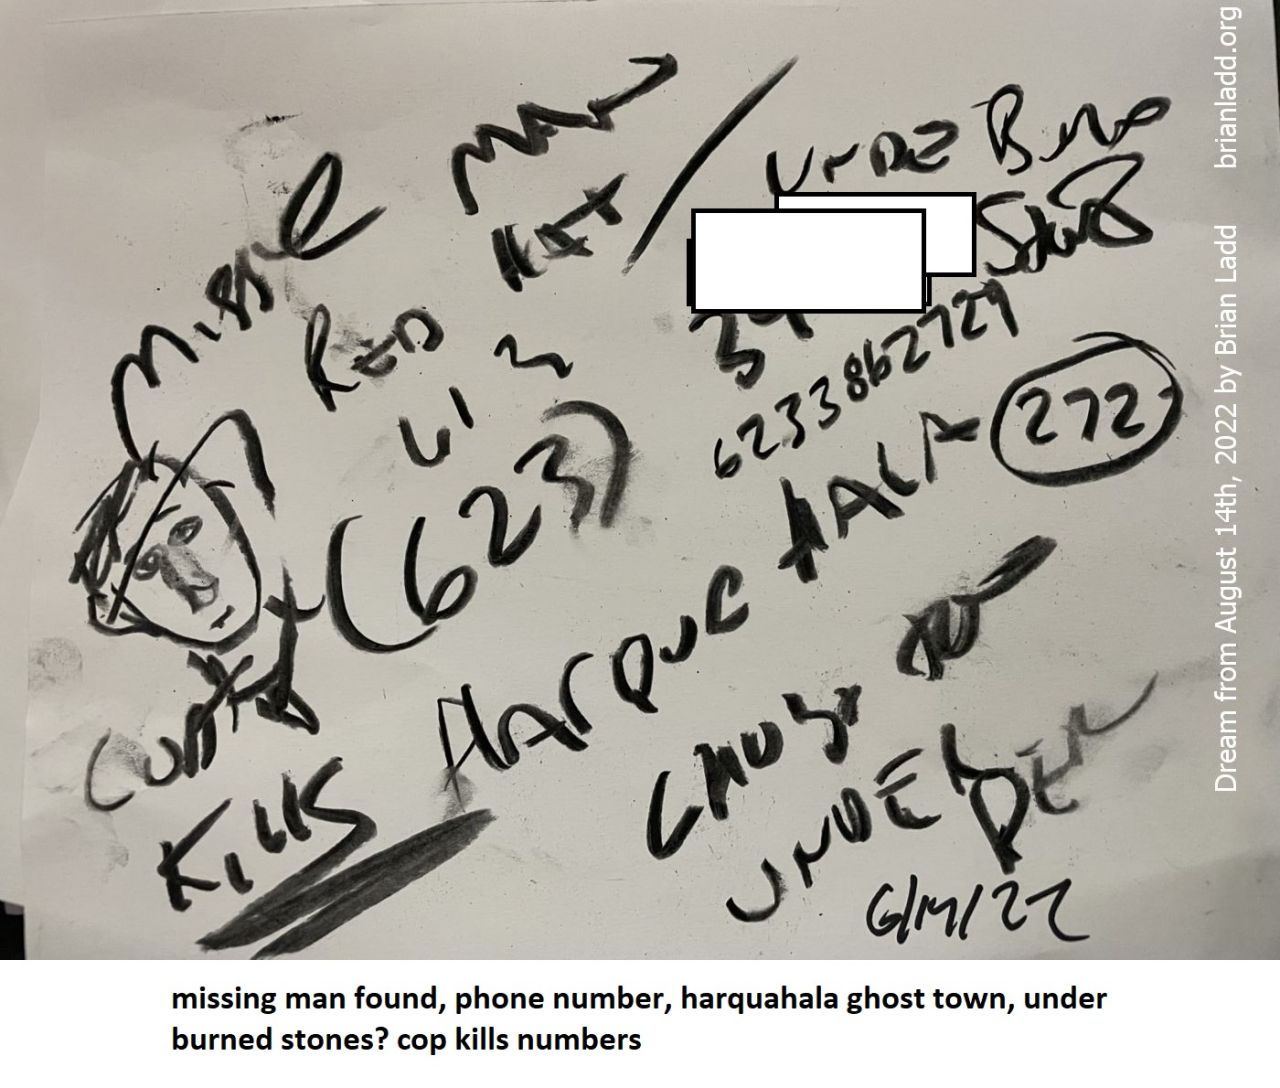 14 August 2022 1 missing man found, phone number, harquahala ghost town, under burned stones? cop kills numbers...
missing man found, phone number, harquahala ghost town, under burned stones? cop kills numbers. 
